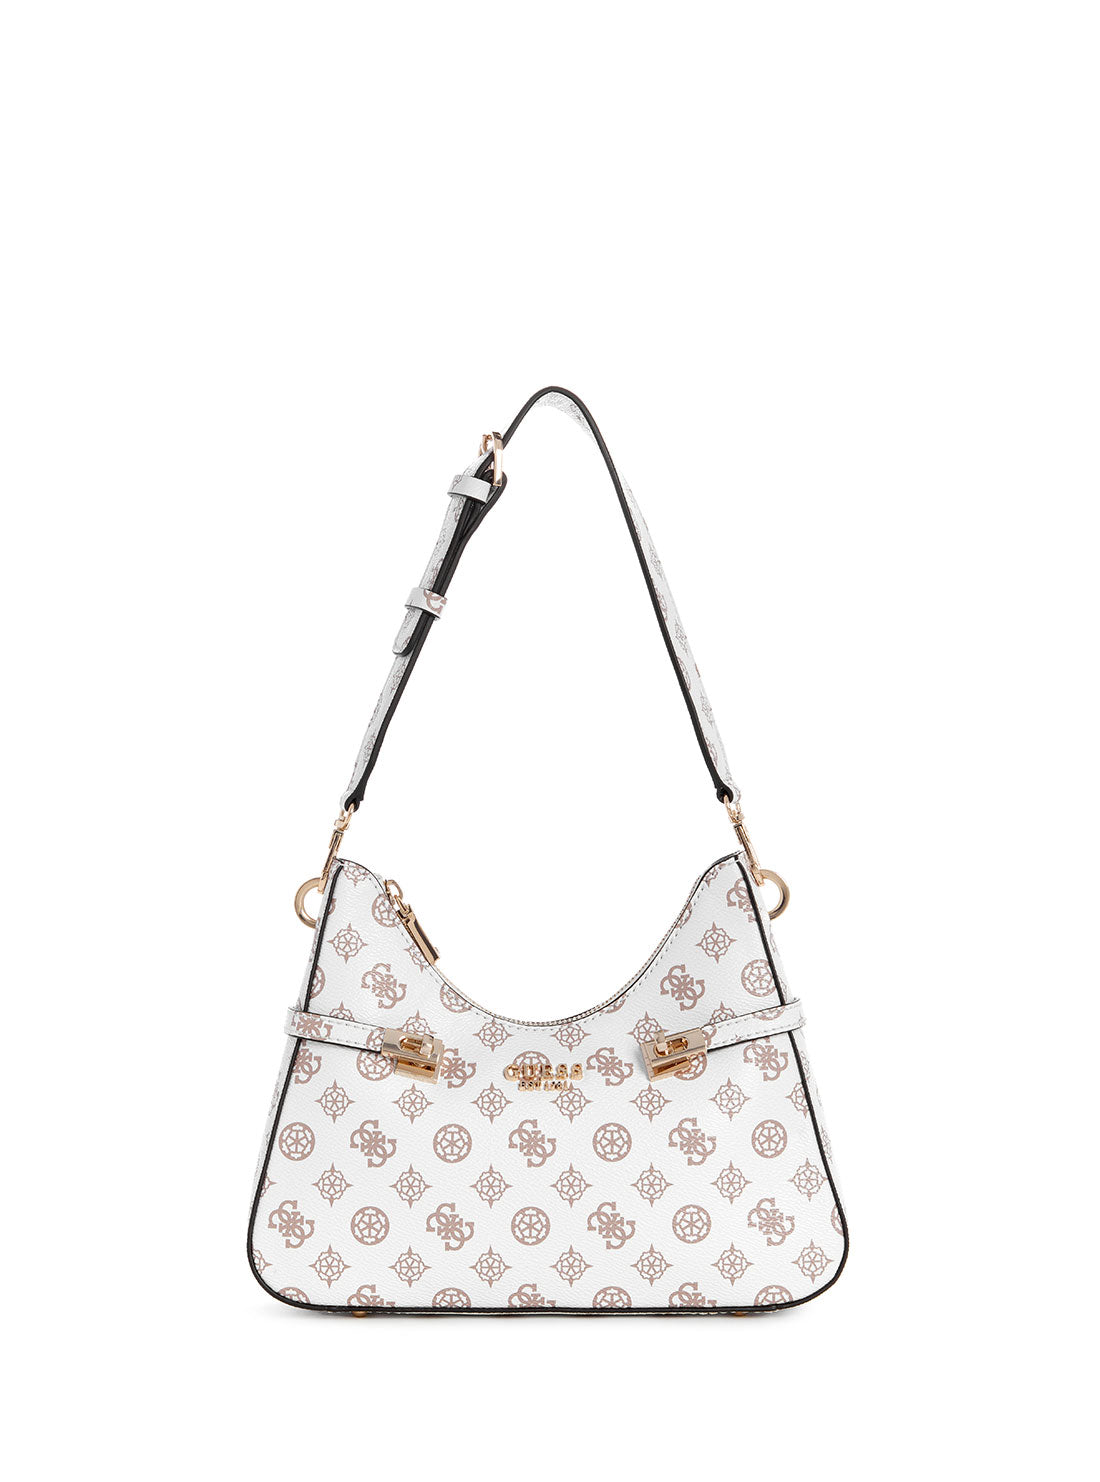 GUESS White Logo Loralee Hobo Bag front view